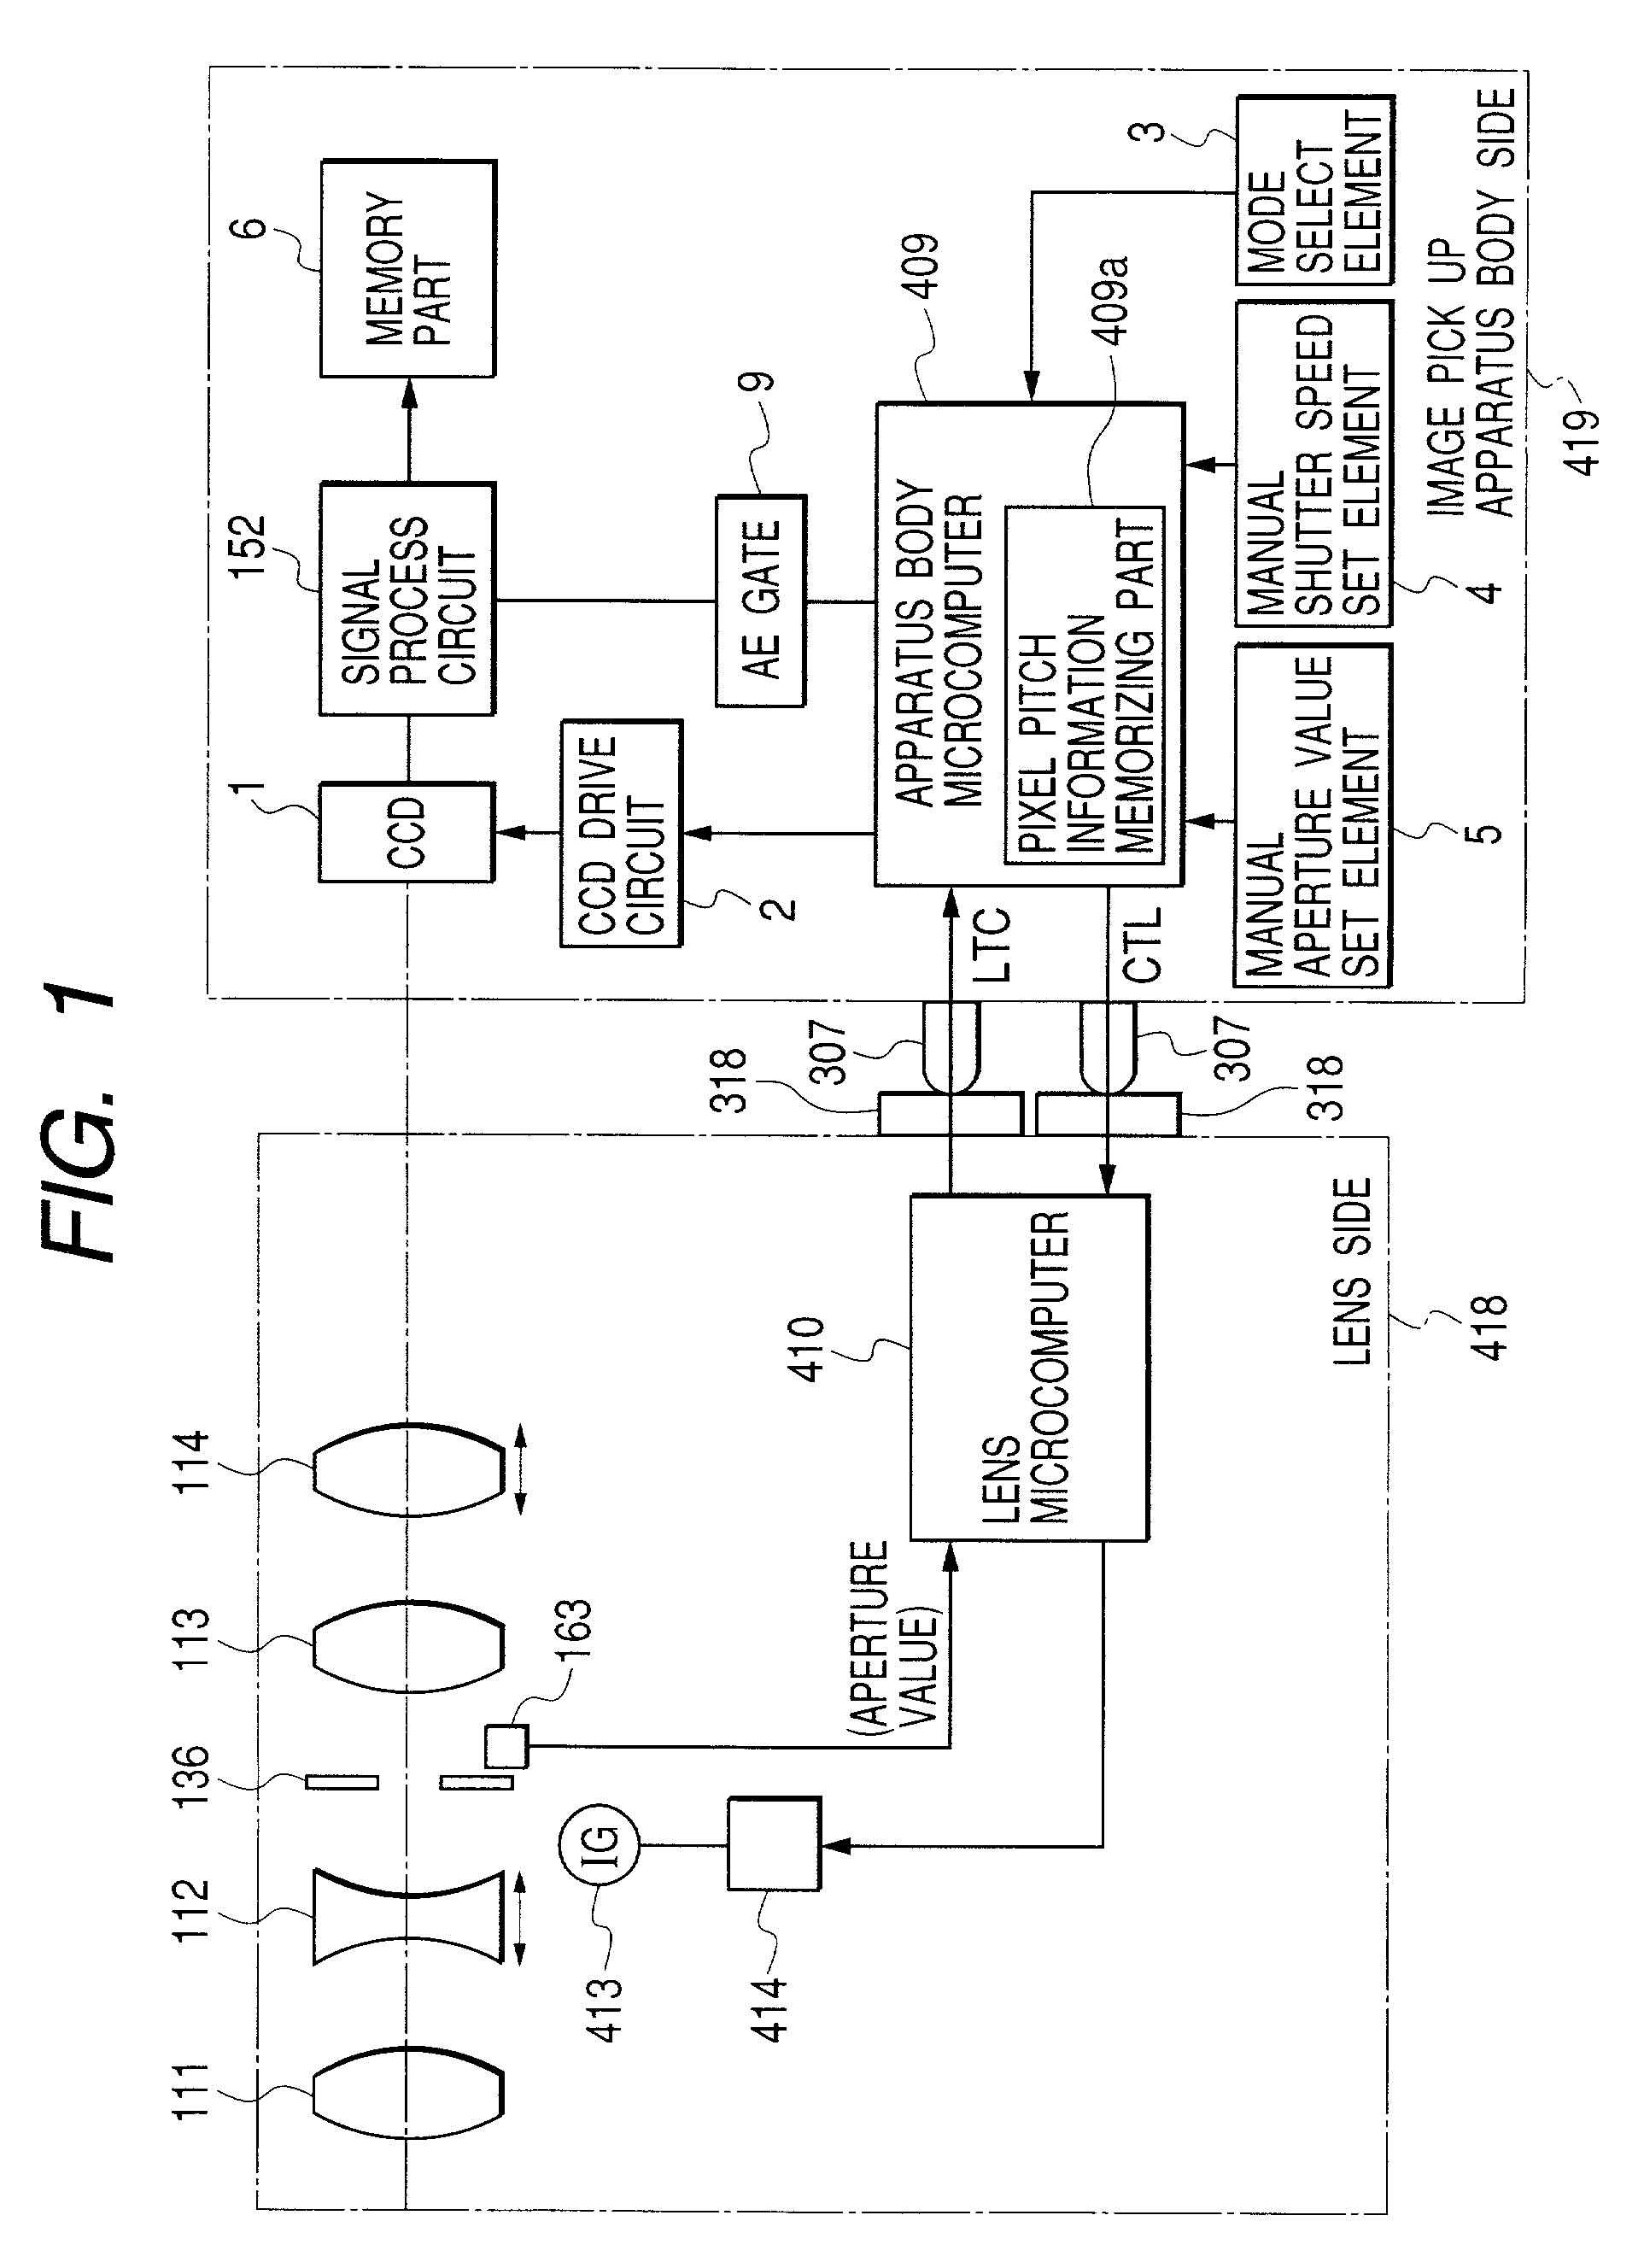 Optical apparatus including image pick-up device and interchangeable lens with controller for controlling change of aperture